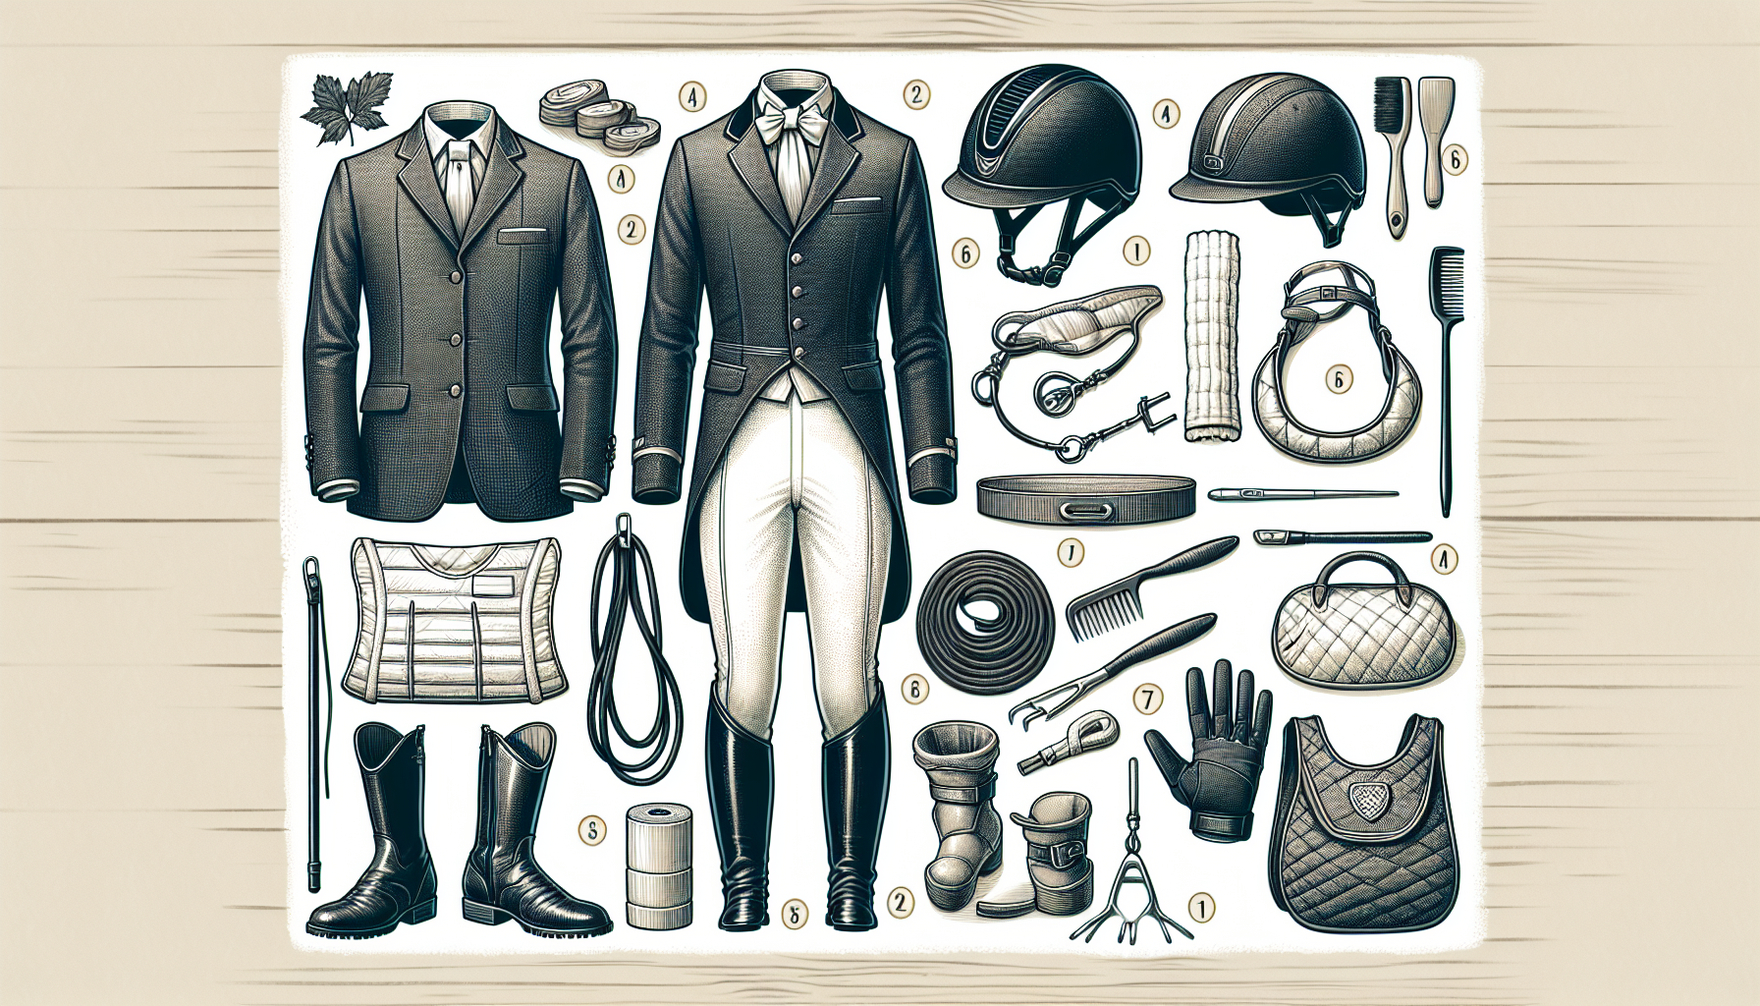 Detailed illustration of the essentials for an equestrian competition attire checklist. This includes a riding helmet for safety, a show jacket for professionalism, riding breeches for comfort and gri